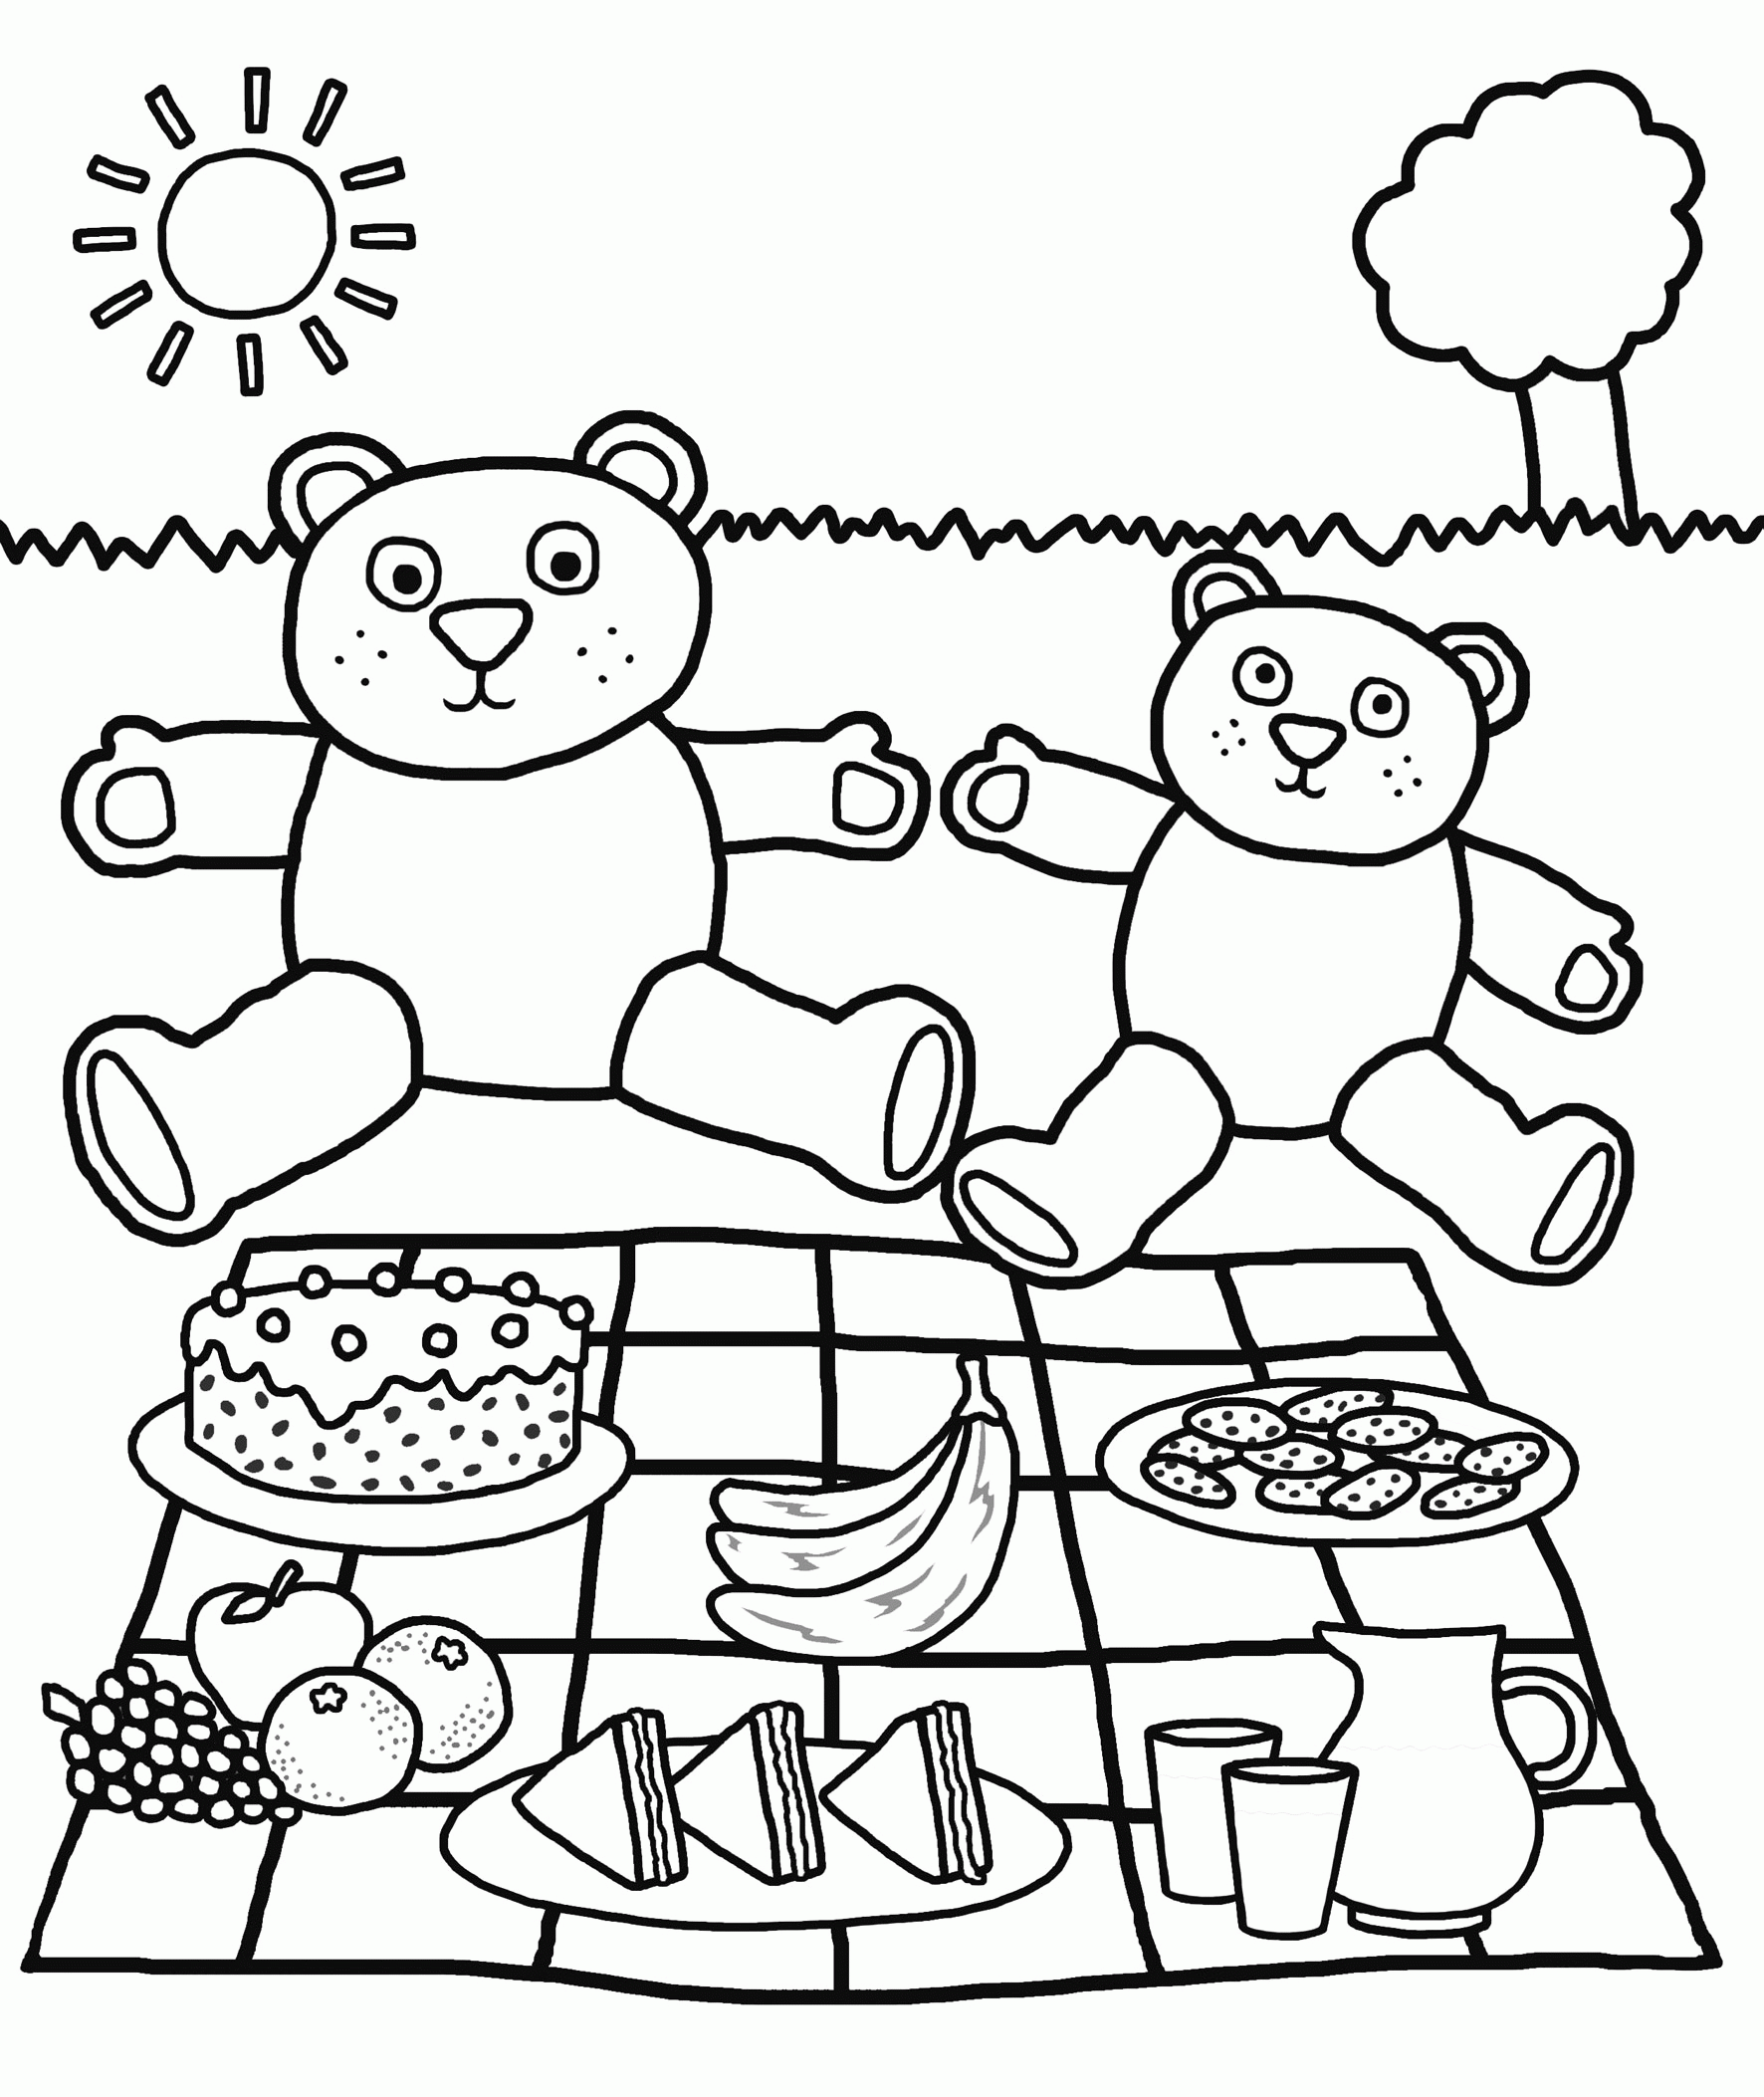 Picnic - Coloring Pages for Kids and for Adults